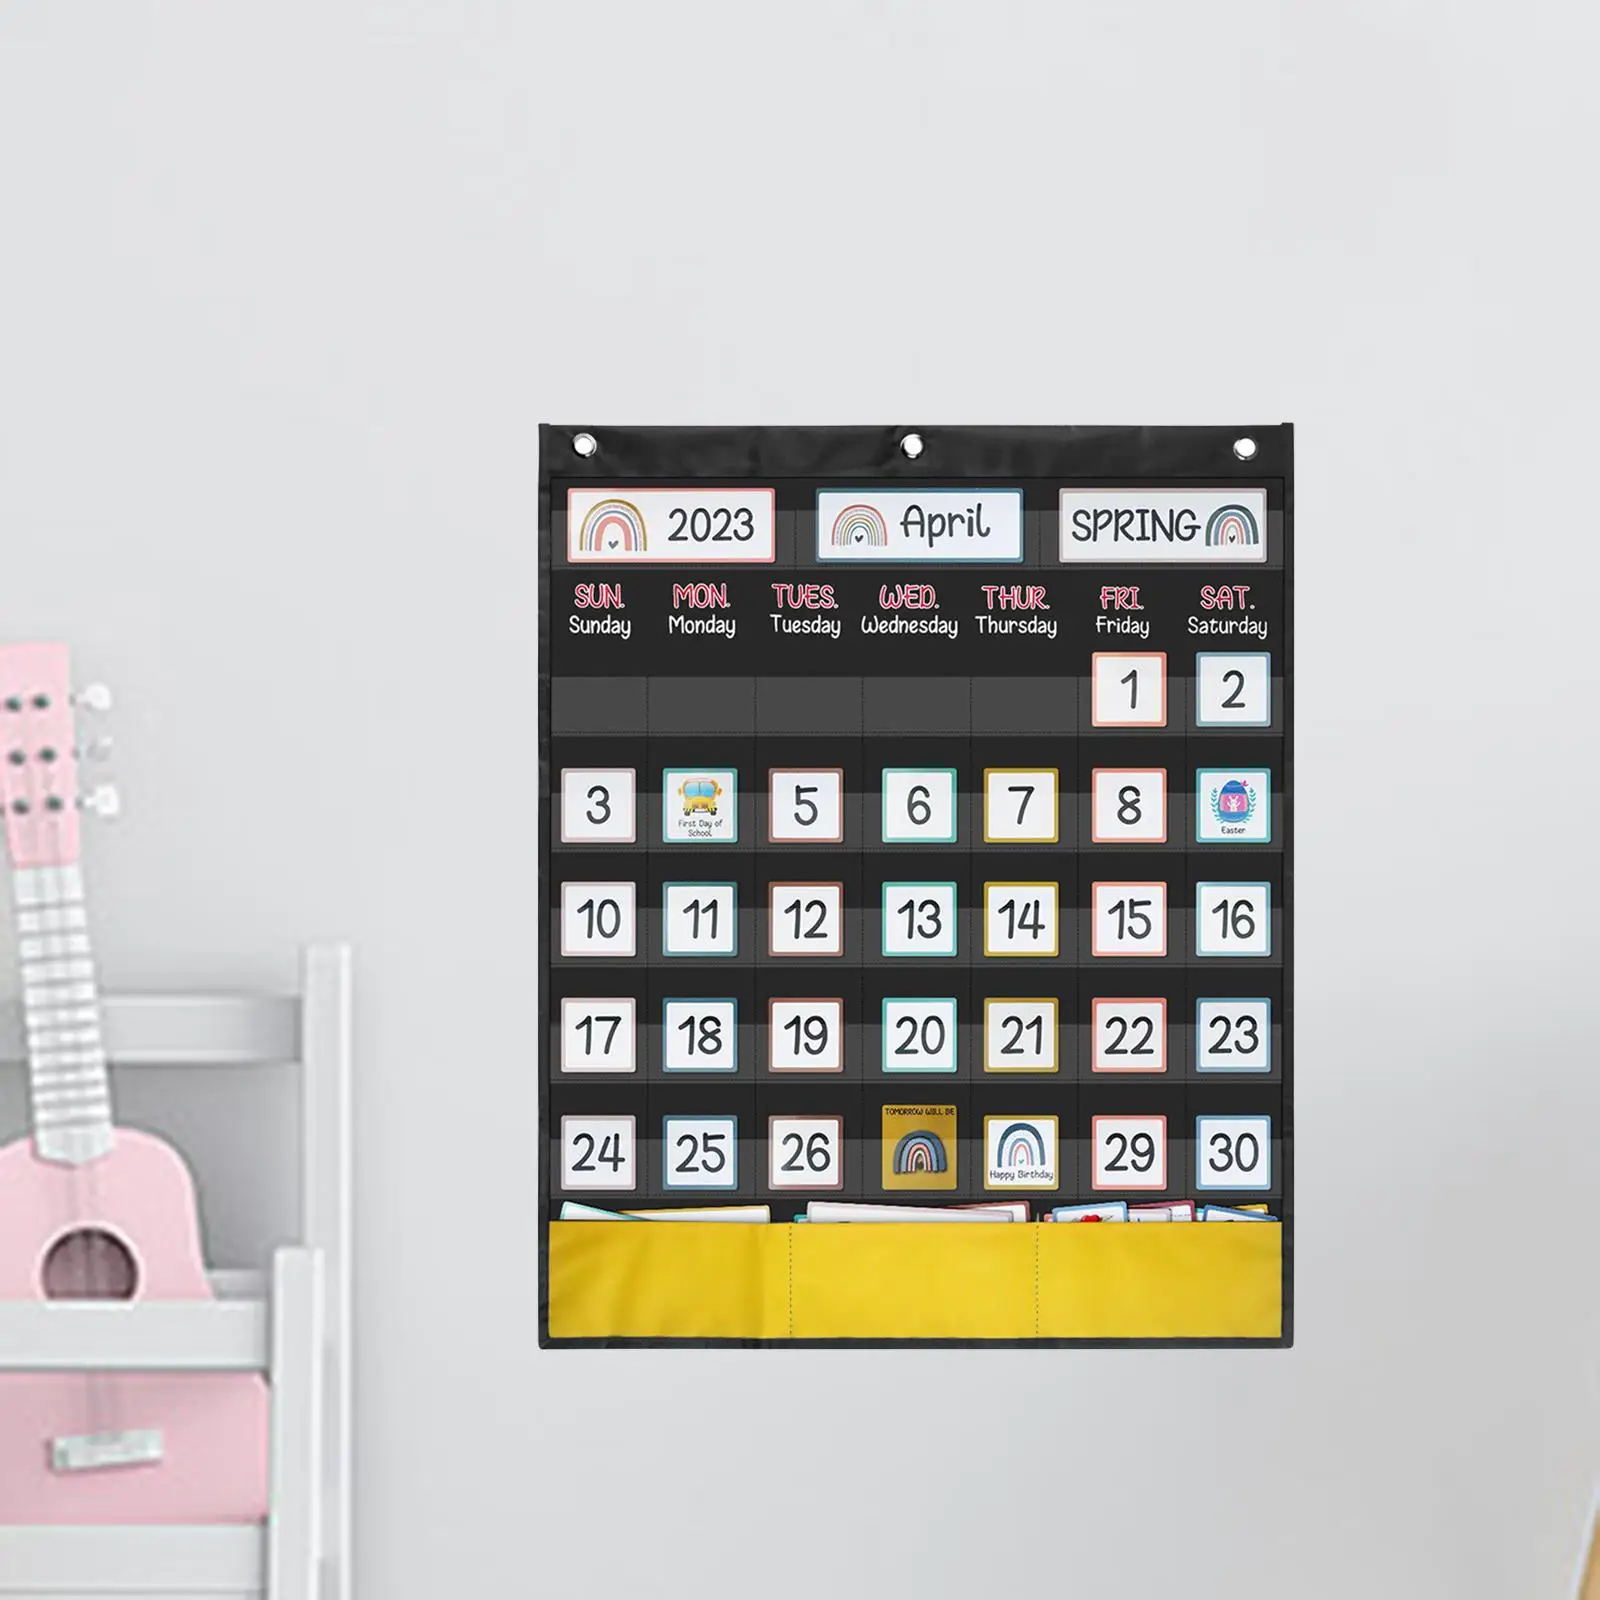 Calendar Pocket Chart Homeschooling with 89 Cards Helping Young Students Weekly Calendar Essential Classroom Organized Chart